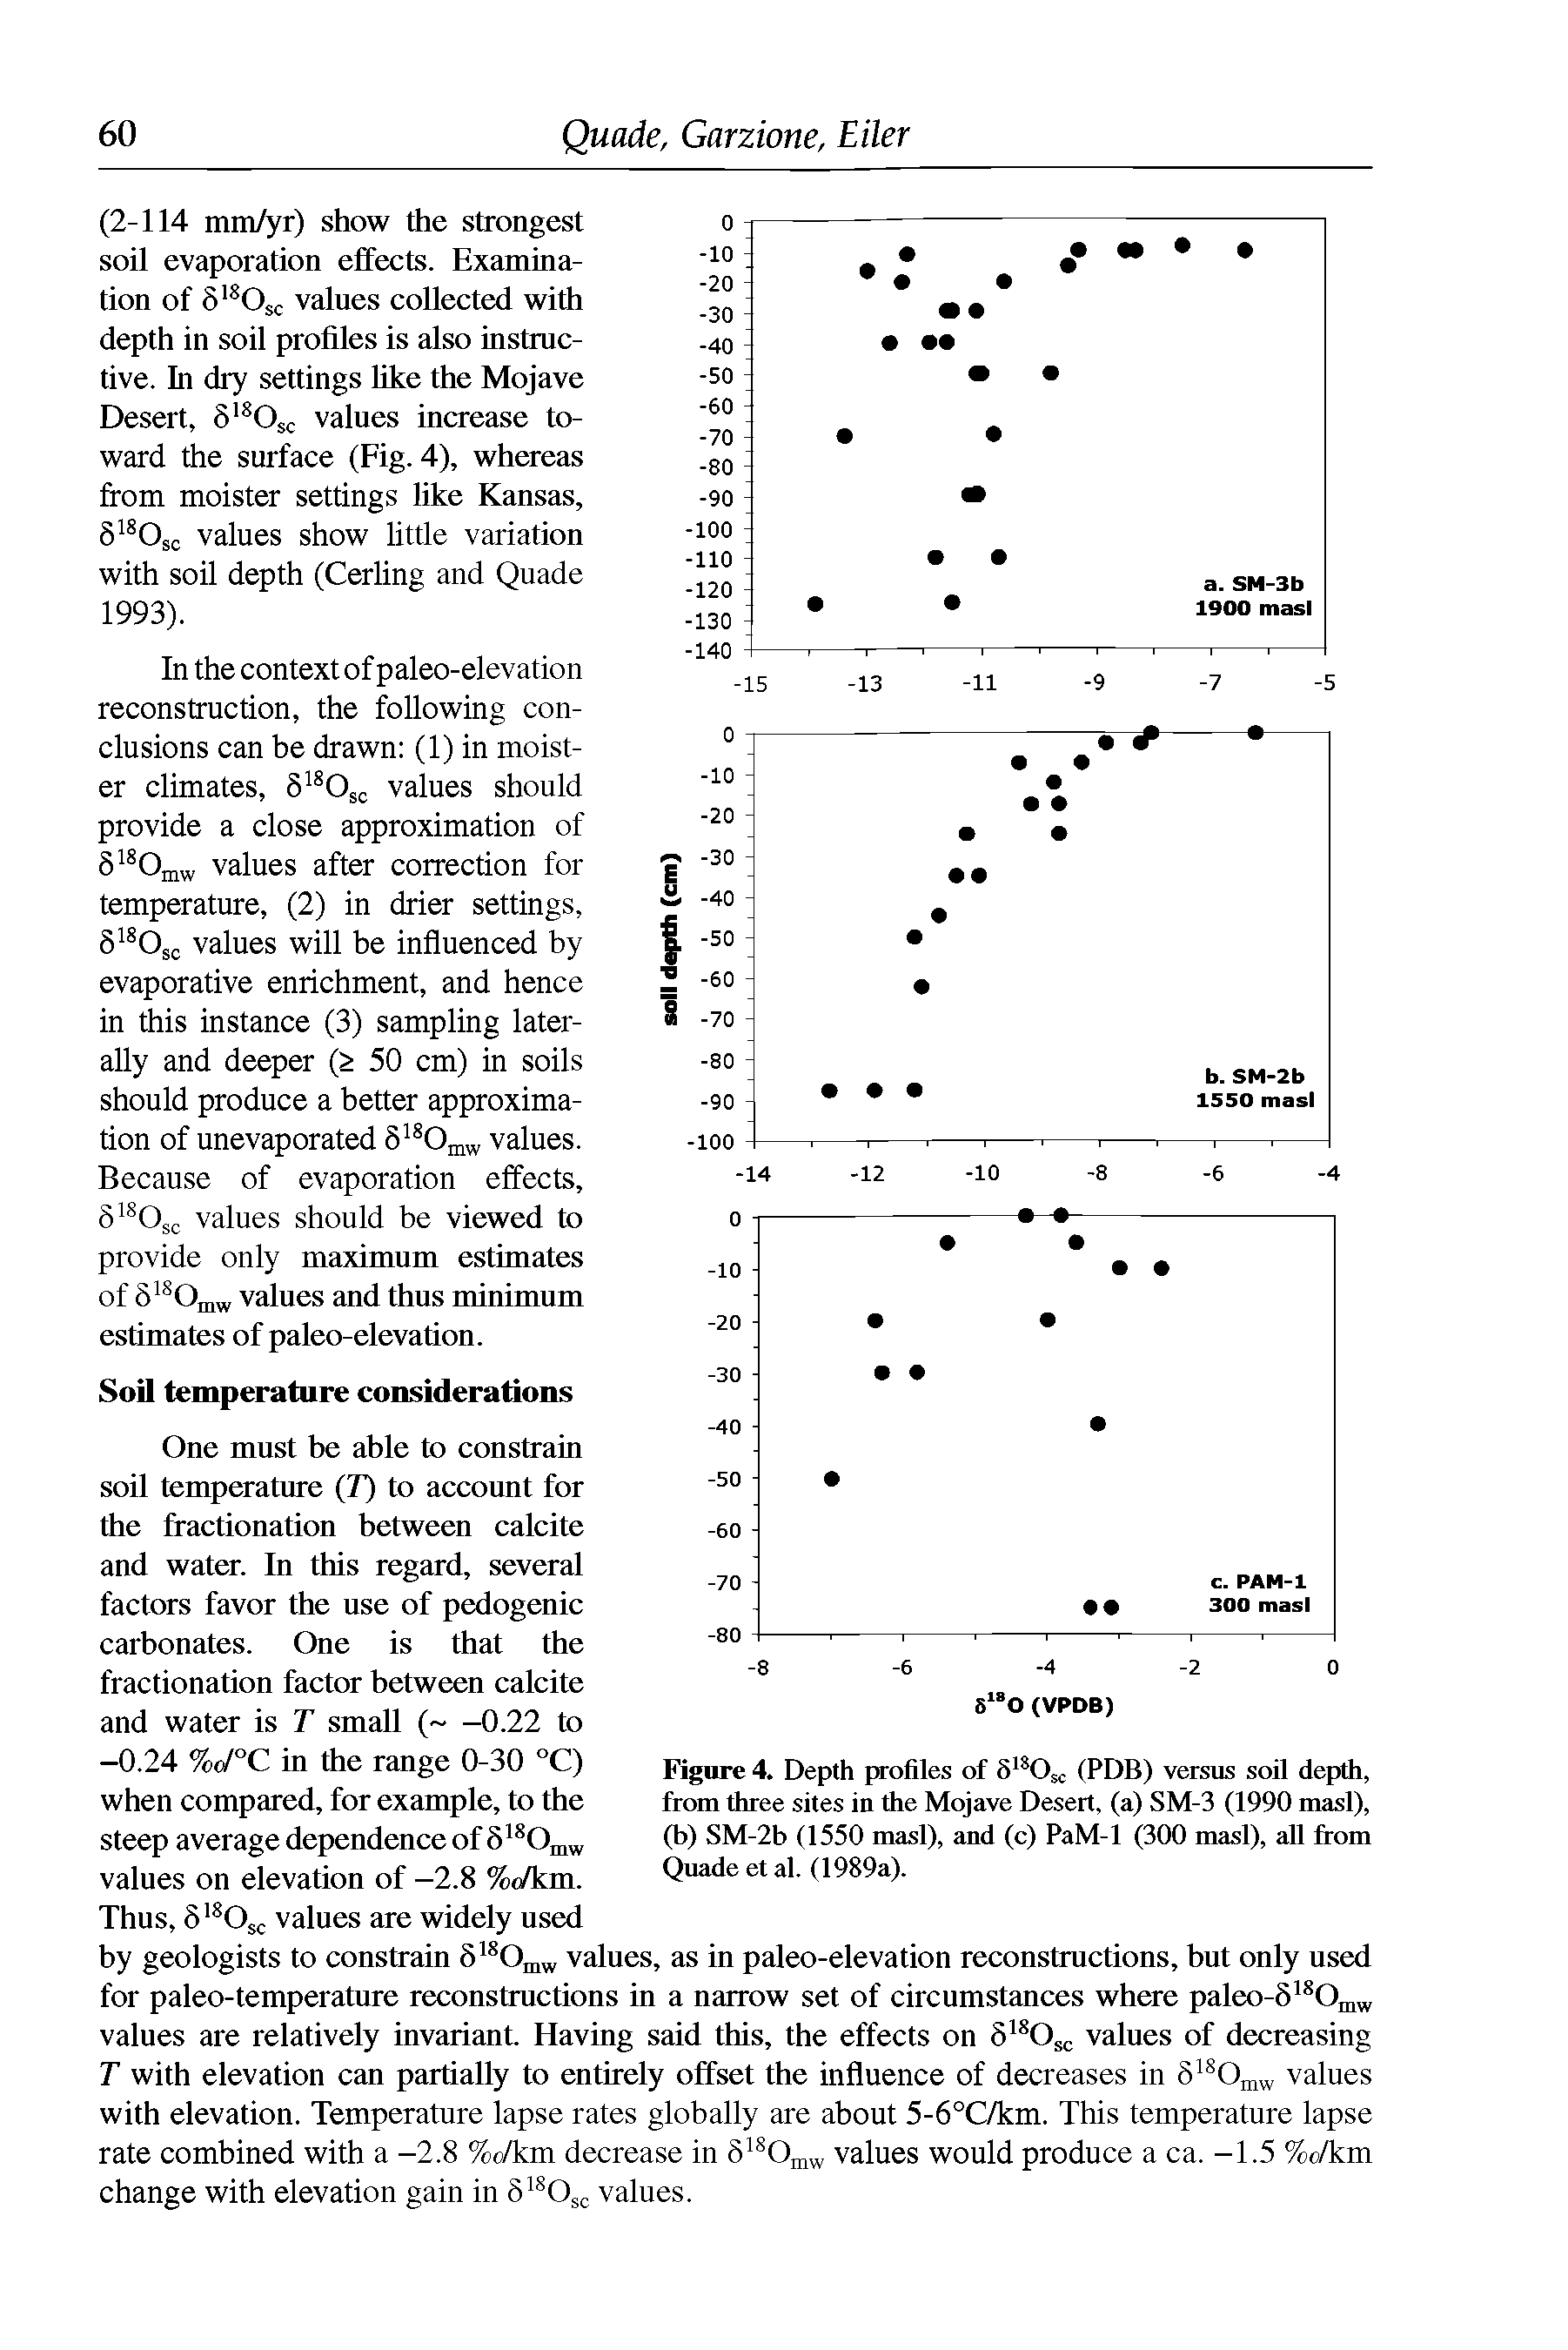 Figure 4. Depth profiles of iil l) (PDB) versus soil depth, from three sites in the Mojave Desert, (a) SM-3 (1990 masl), (b) SM-2b (1550 masl), and (c) PaM-1 (300 masl), all from Quade et al. (1989a).